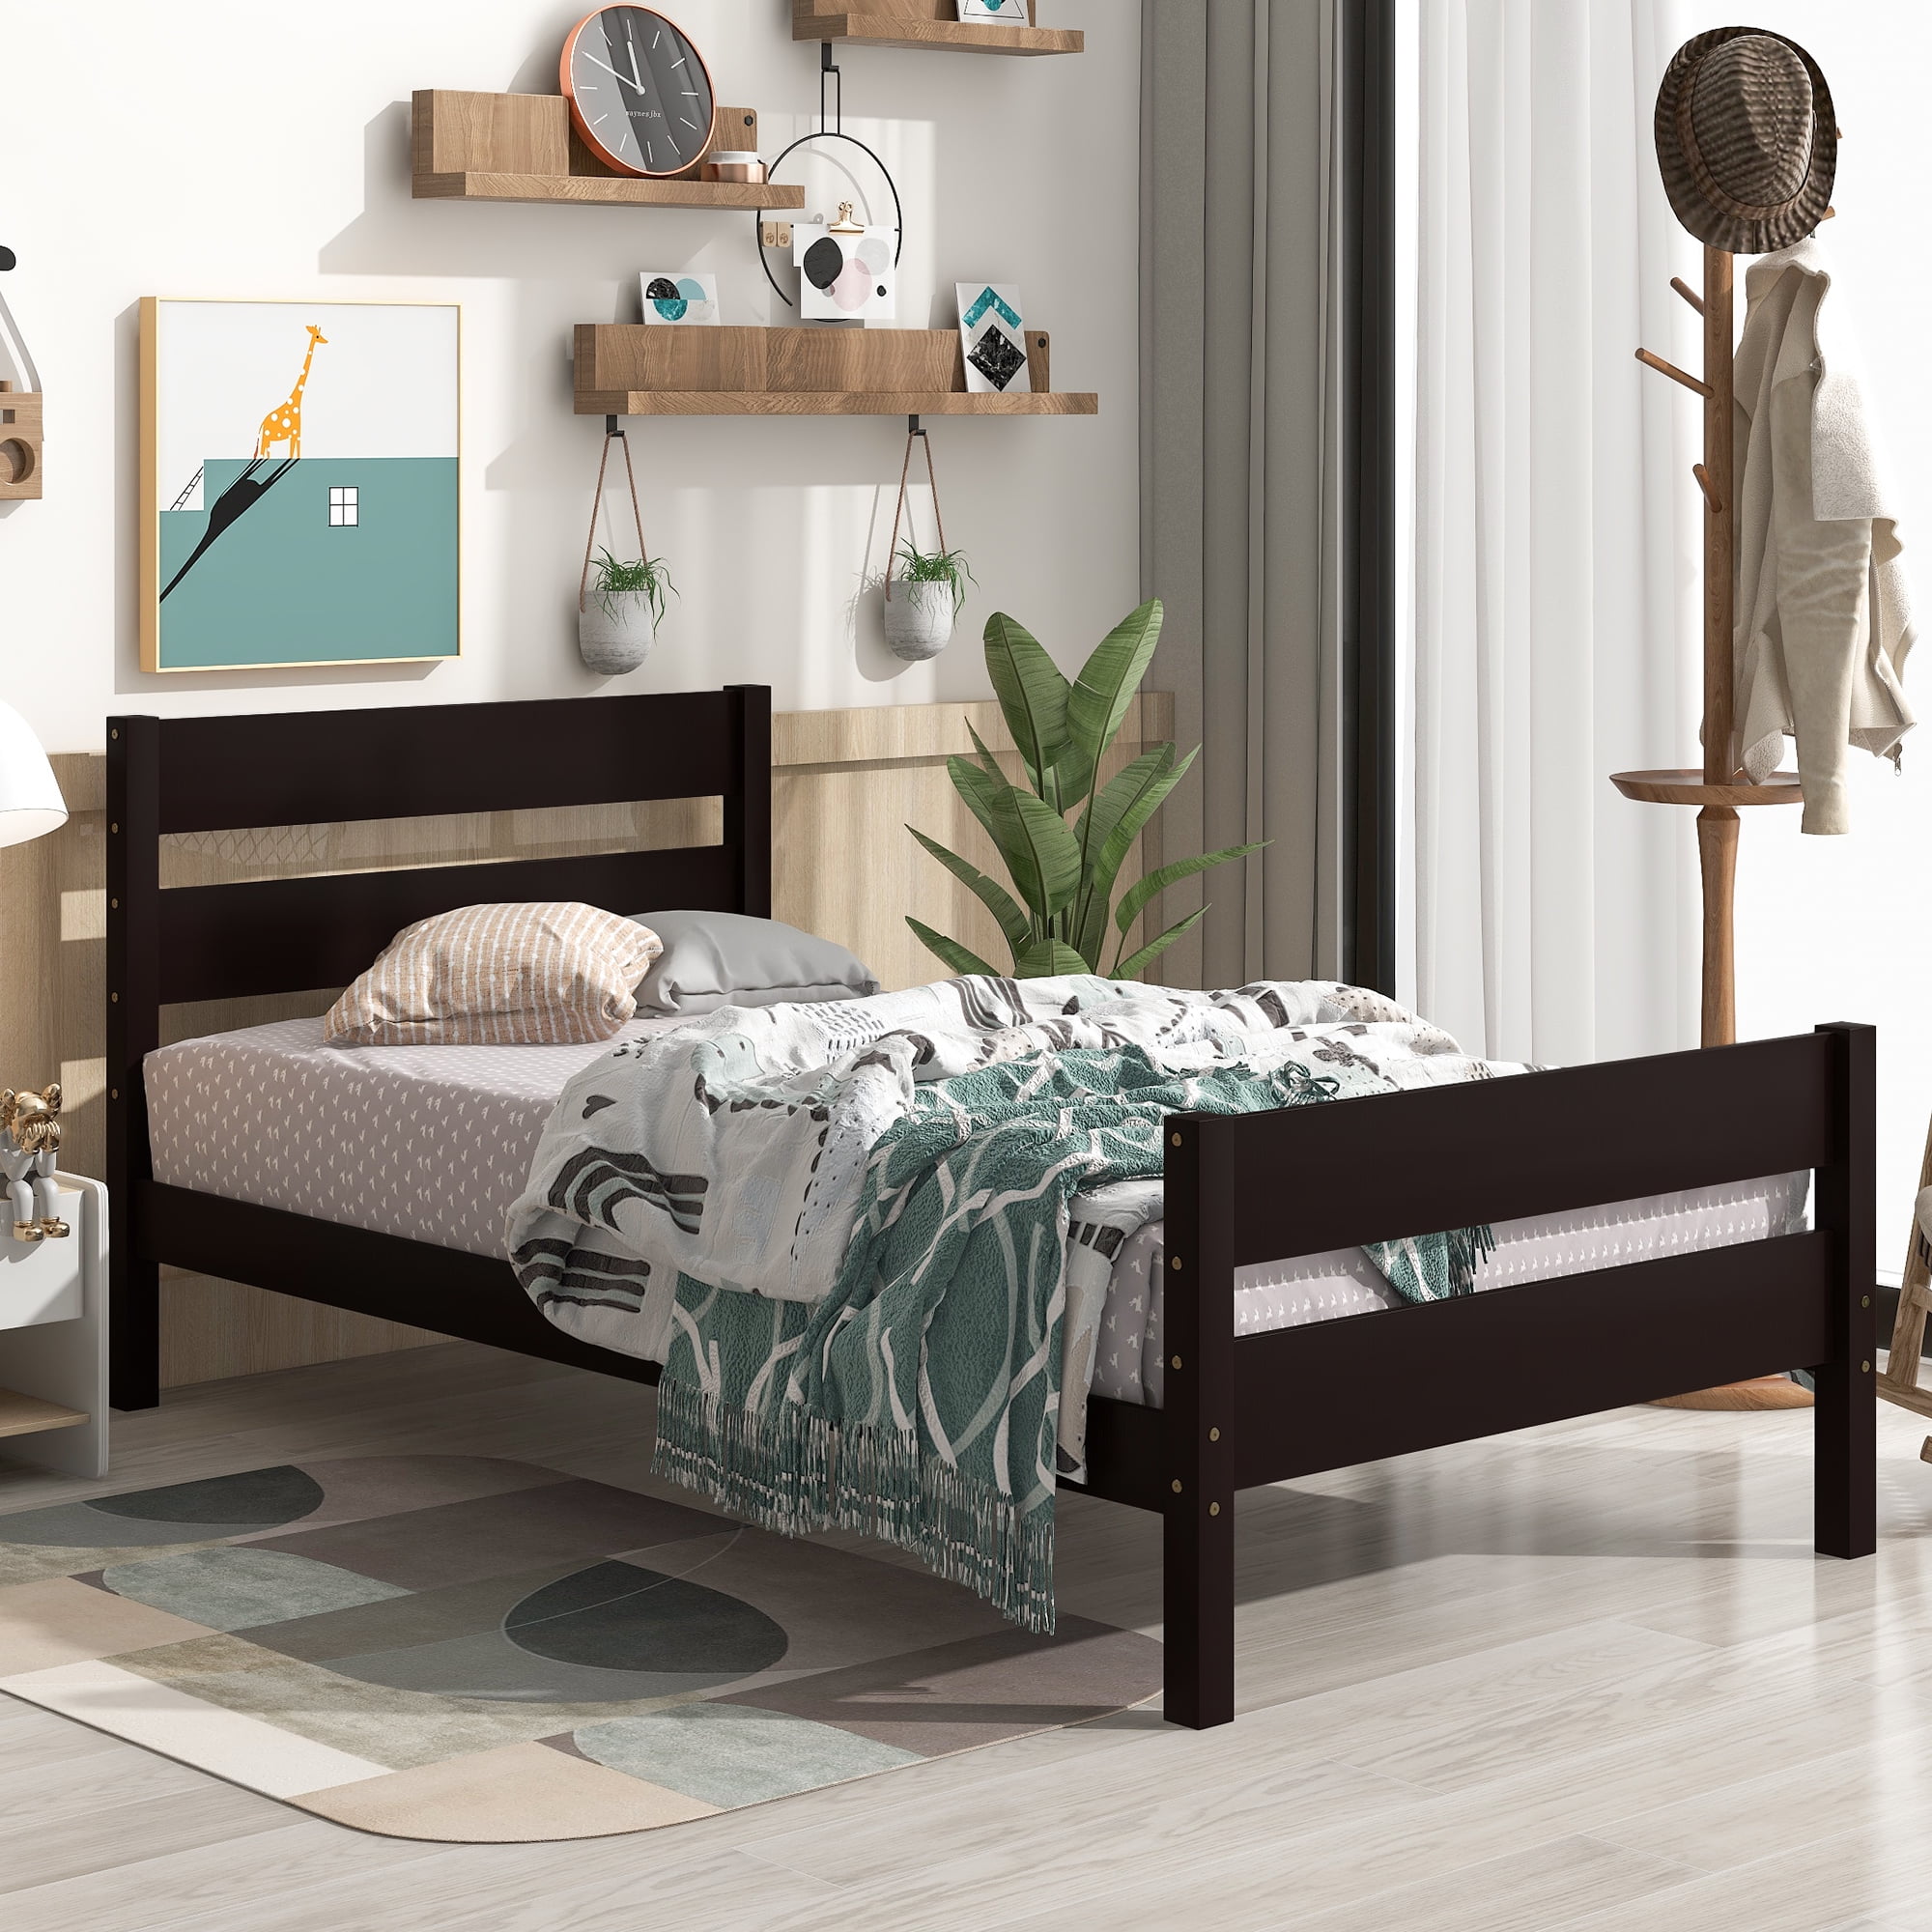 Uhomepro Platform Bed Frame With Headboard And Footboard Modern Twin